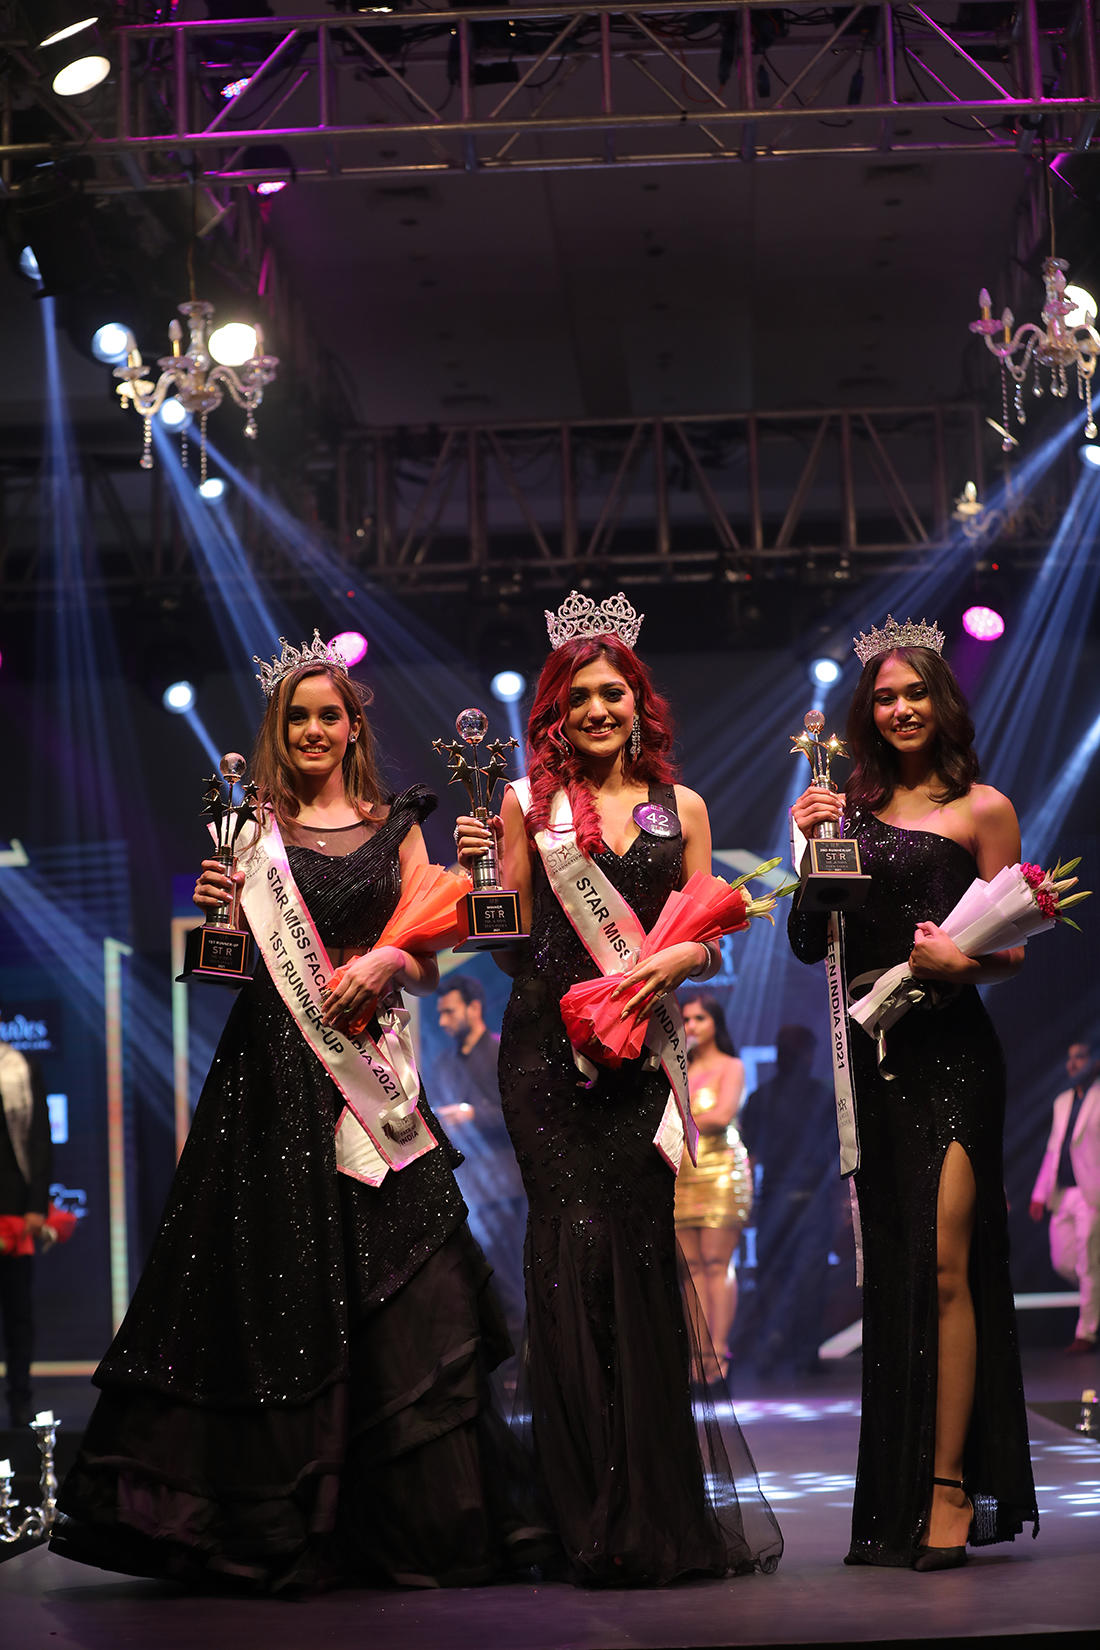 Pictures of young & gorgeous talents from Star Entertainment beauty Pageant